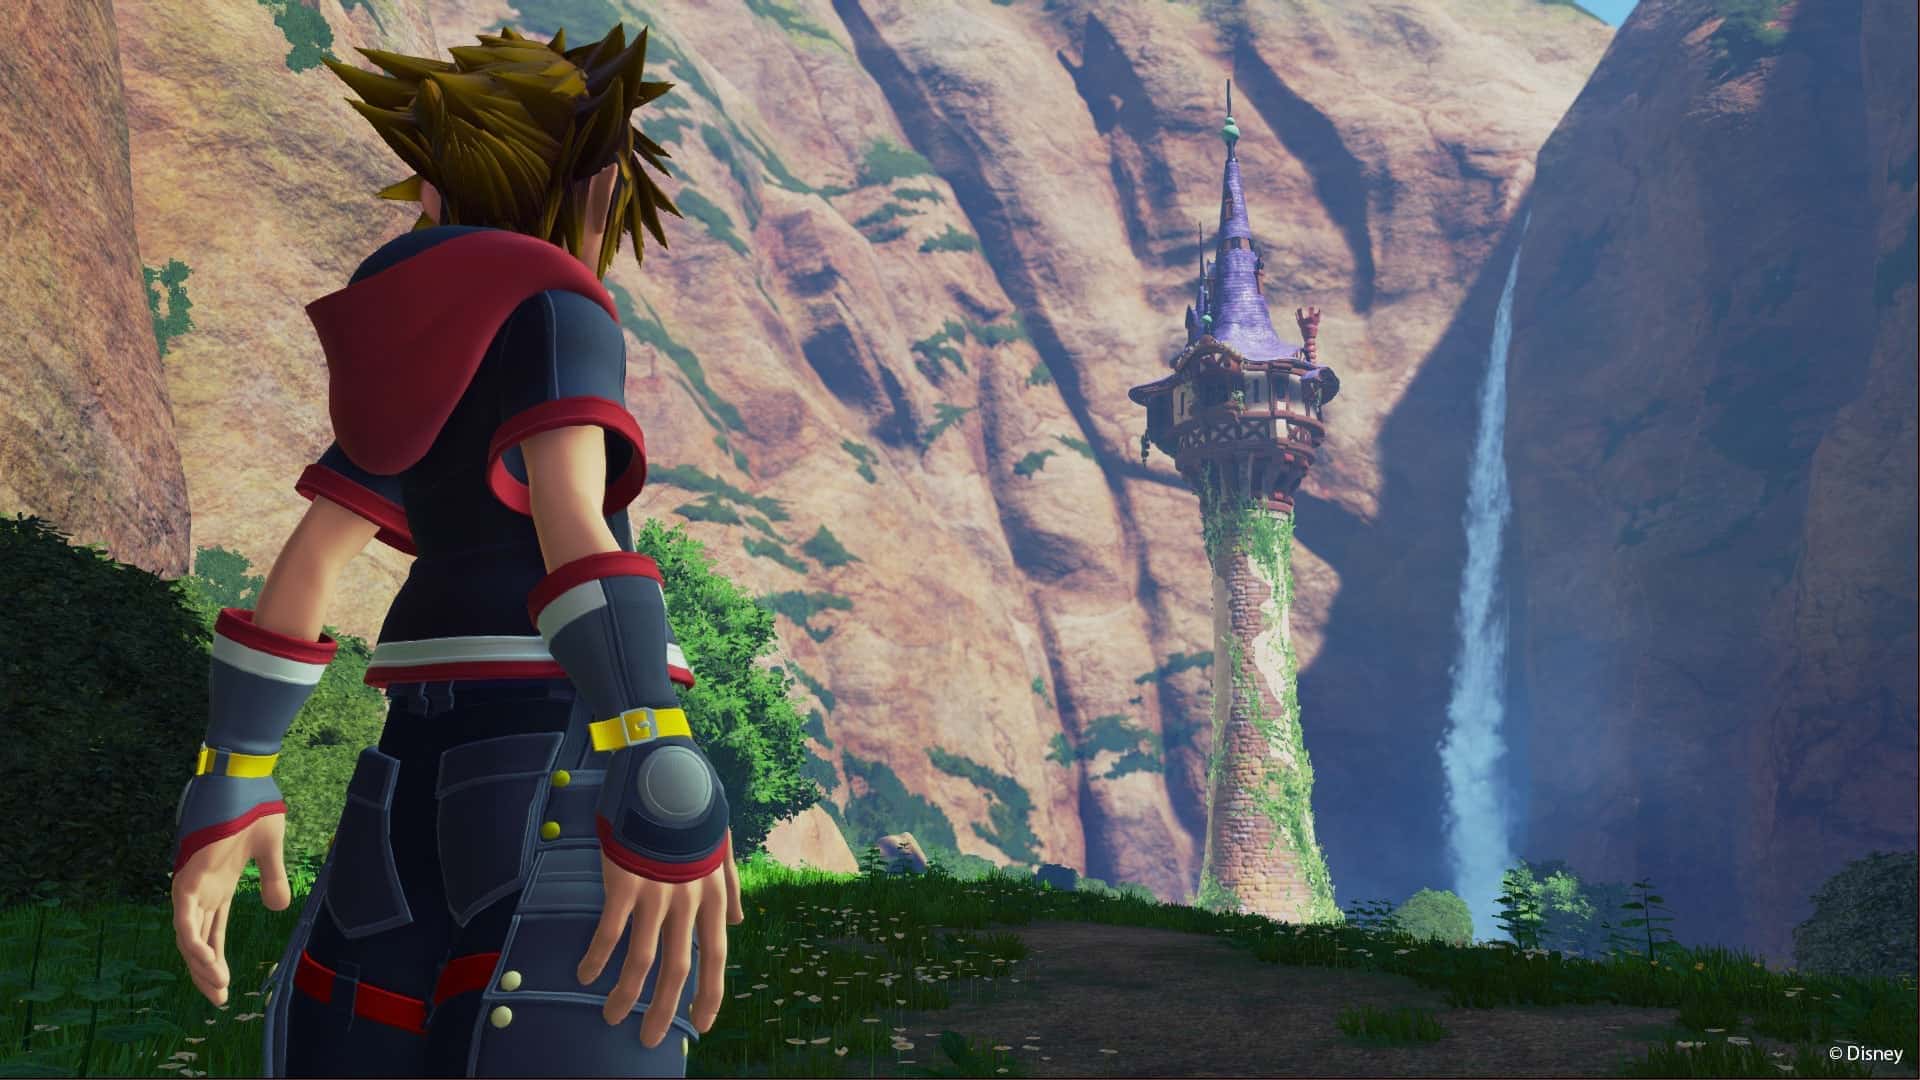 Avatar in Kingdom Hearts 3 looks out onto Rapunzel's tower in the middle of a valley